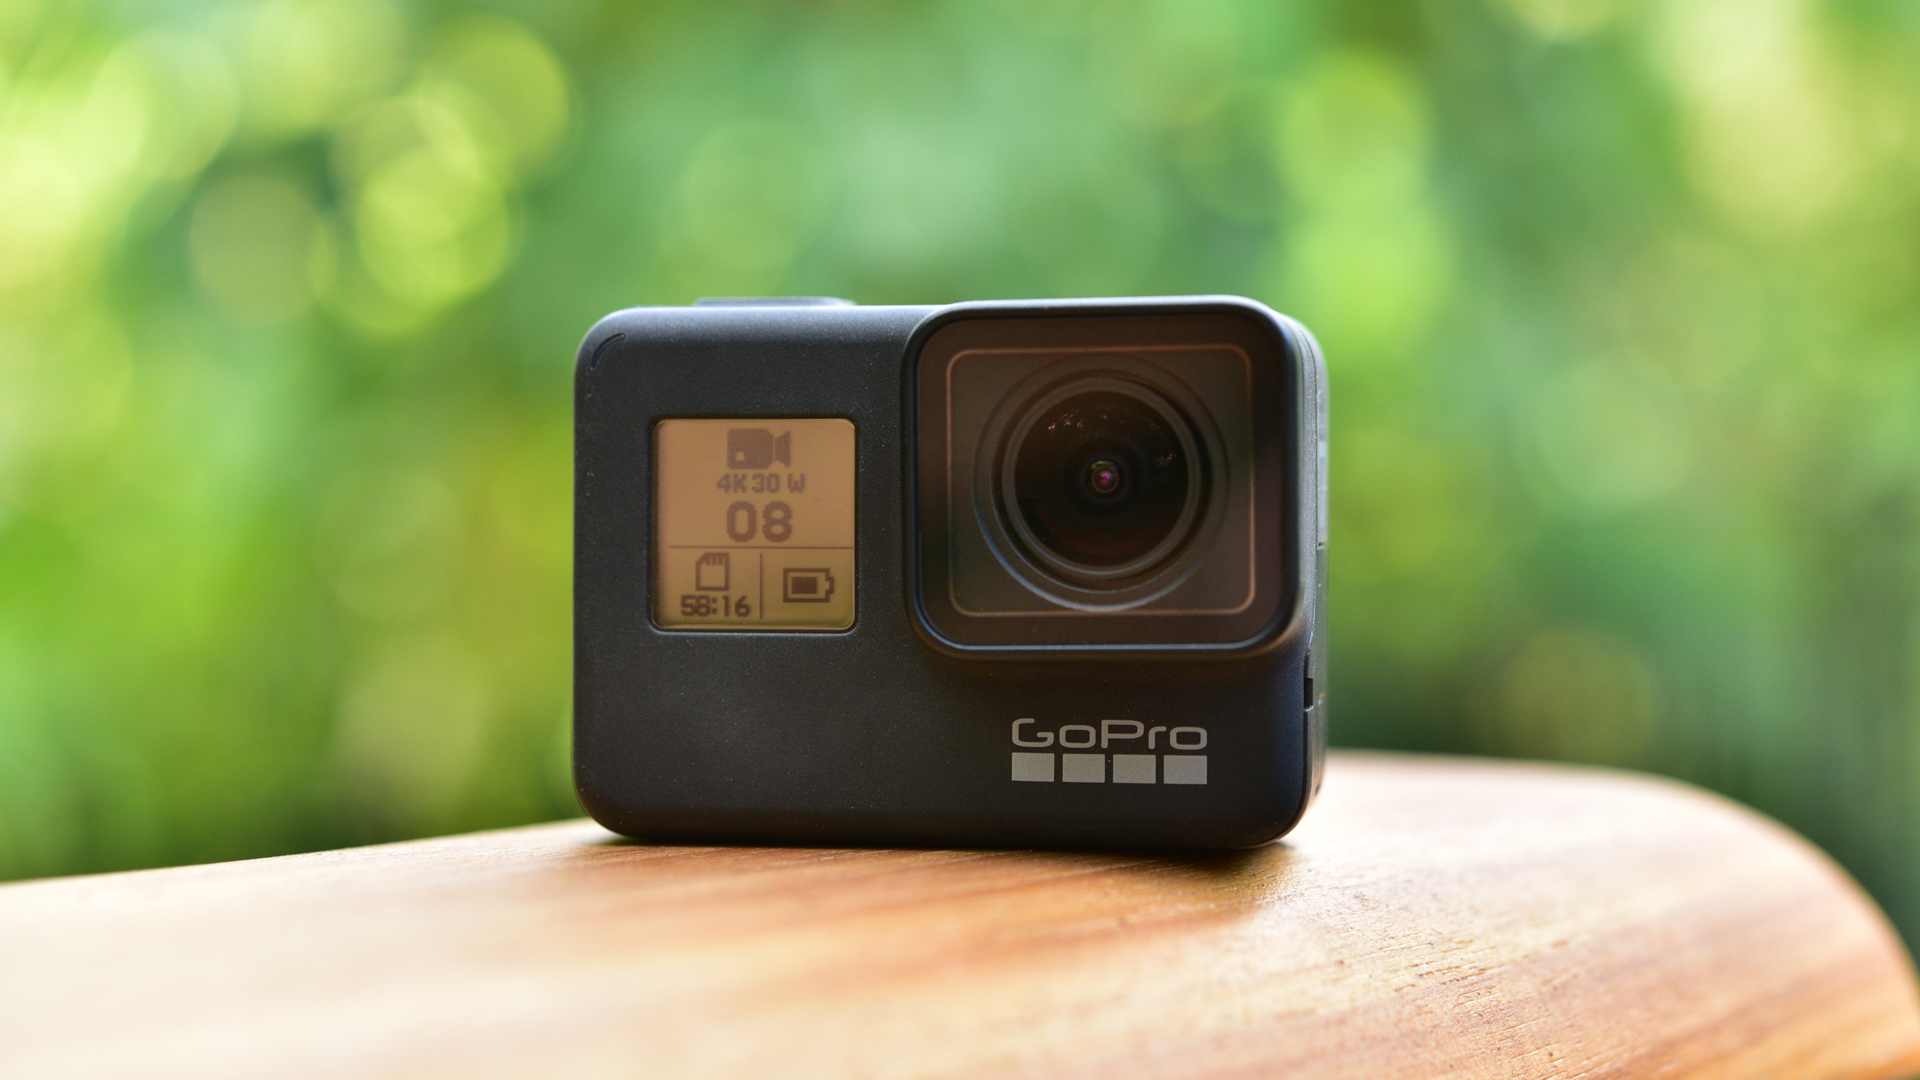 More Gopro Hero 8 Black Details Revealed In Latest Batch Of Leaked